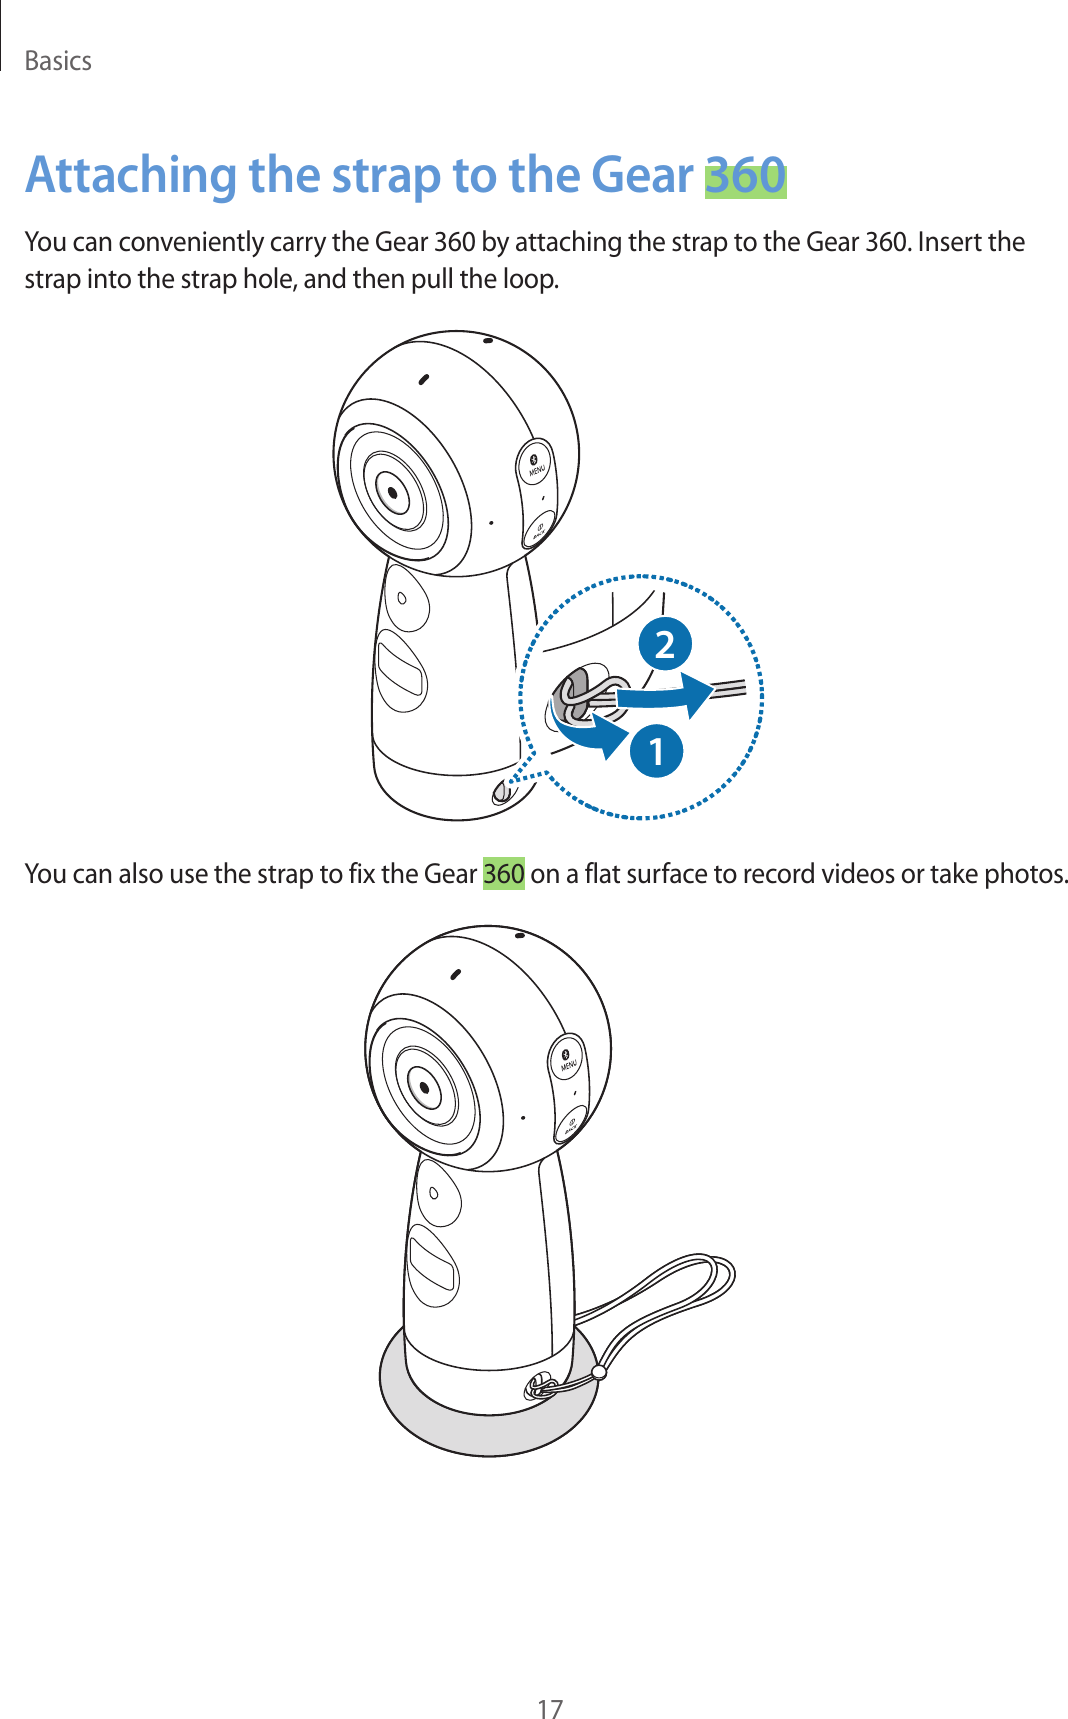 Basics17Attaching the strap to the Gear 360You can conveniently carry the Gear 360 by attaching the strap to the Gear 360. Insert the strap into the strap hole, and then pull the loop.12You can also use the strap to fix the Gear 360 on a flat surface to record videos or take photos.